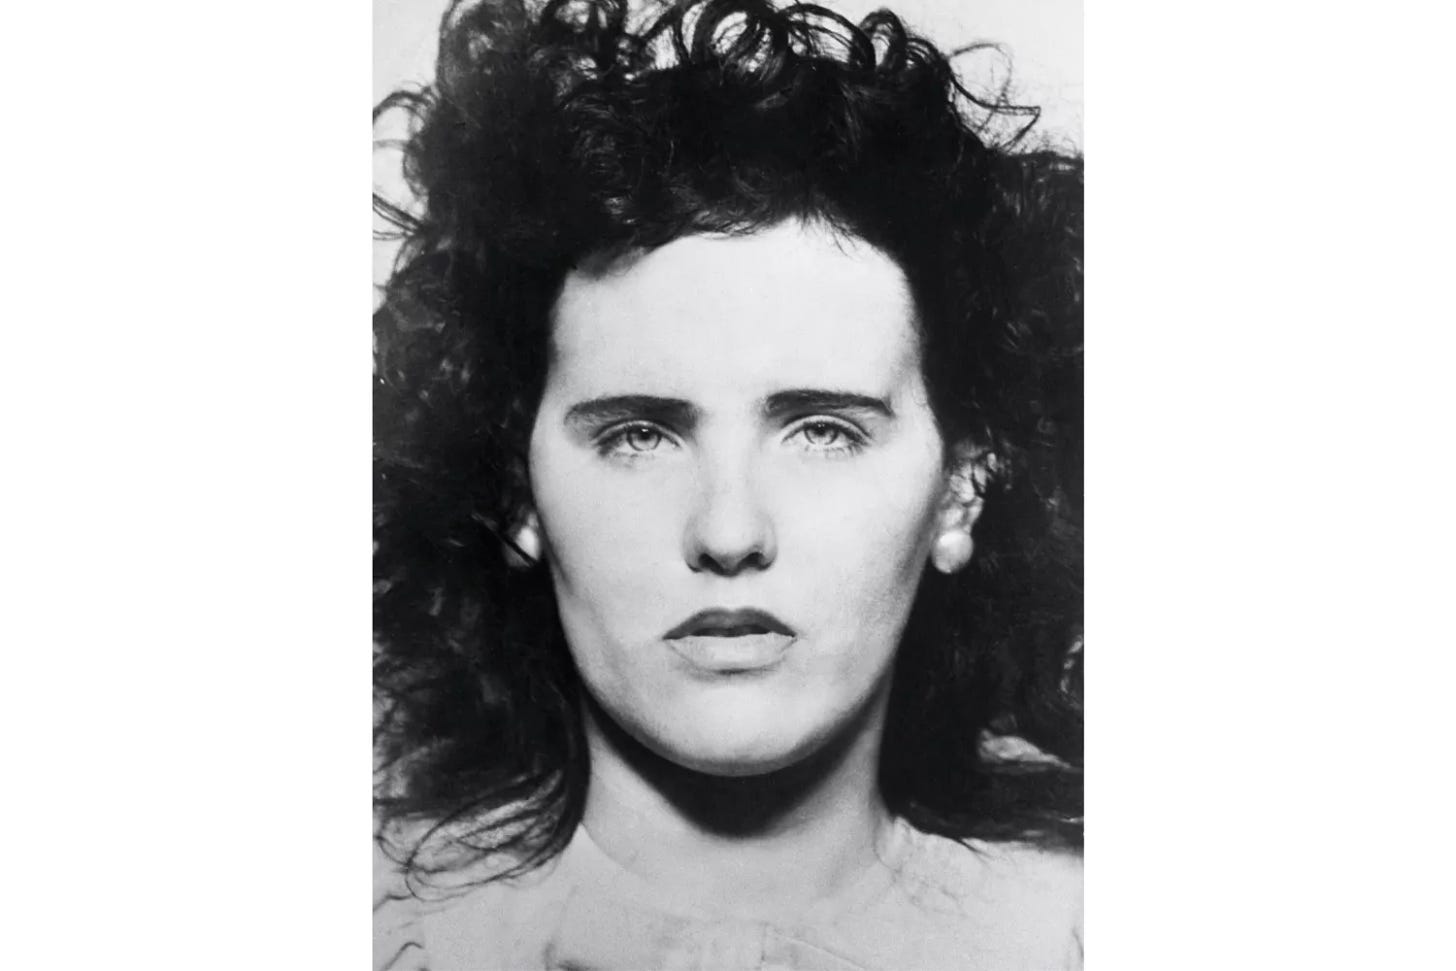 The FBI disclosed tonight that the fingerprints of a young woman whose mutilated body was found yesterday in a Los Angeles parking lot were those of Miss Elizabeth Short